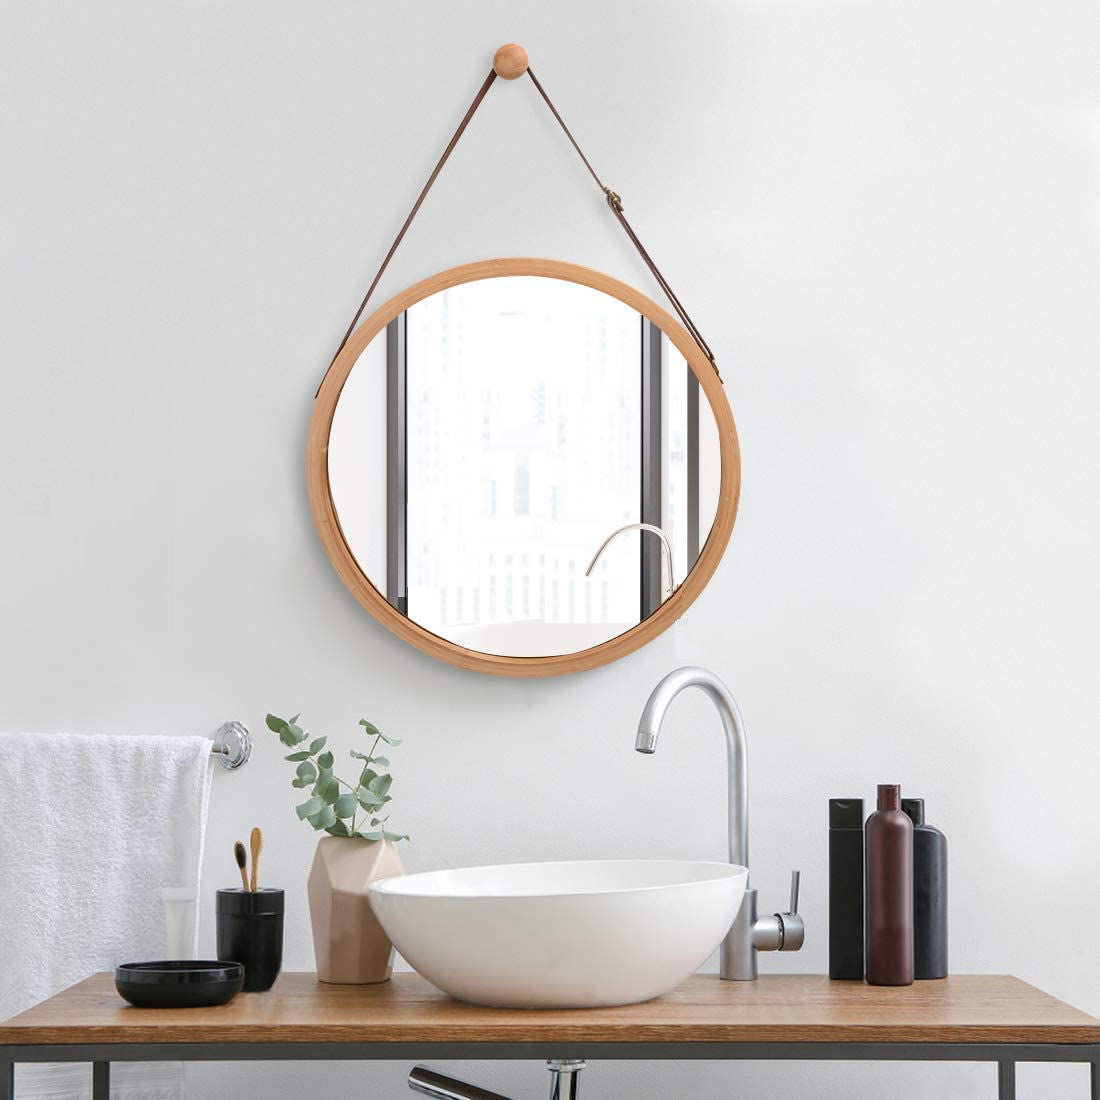 Hanging Round Wall Mirror 38 cm - Solid Bamboo Frame and Adjustable Leather Strap for Bathroom and Bedroom | Auzzi Store